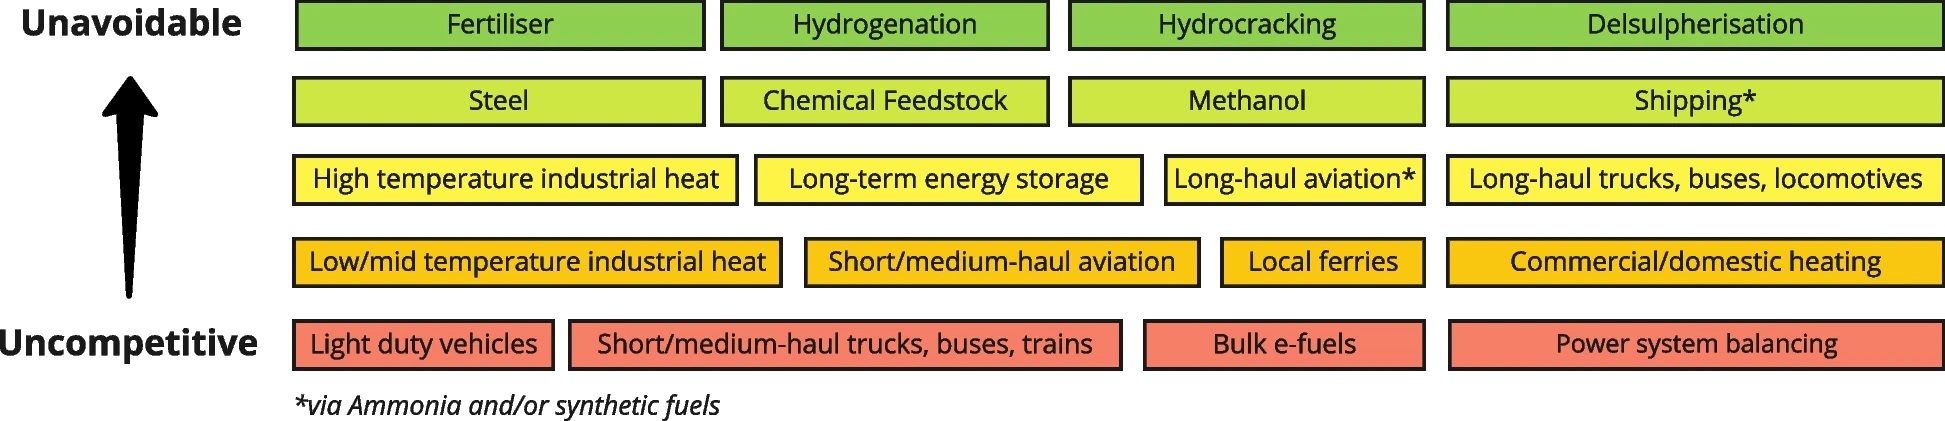 Listing of various hydrogen applications spanning from unavoidable, in green, to uncompetitive, in red